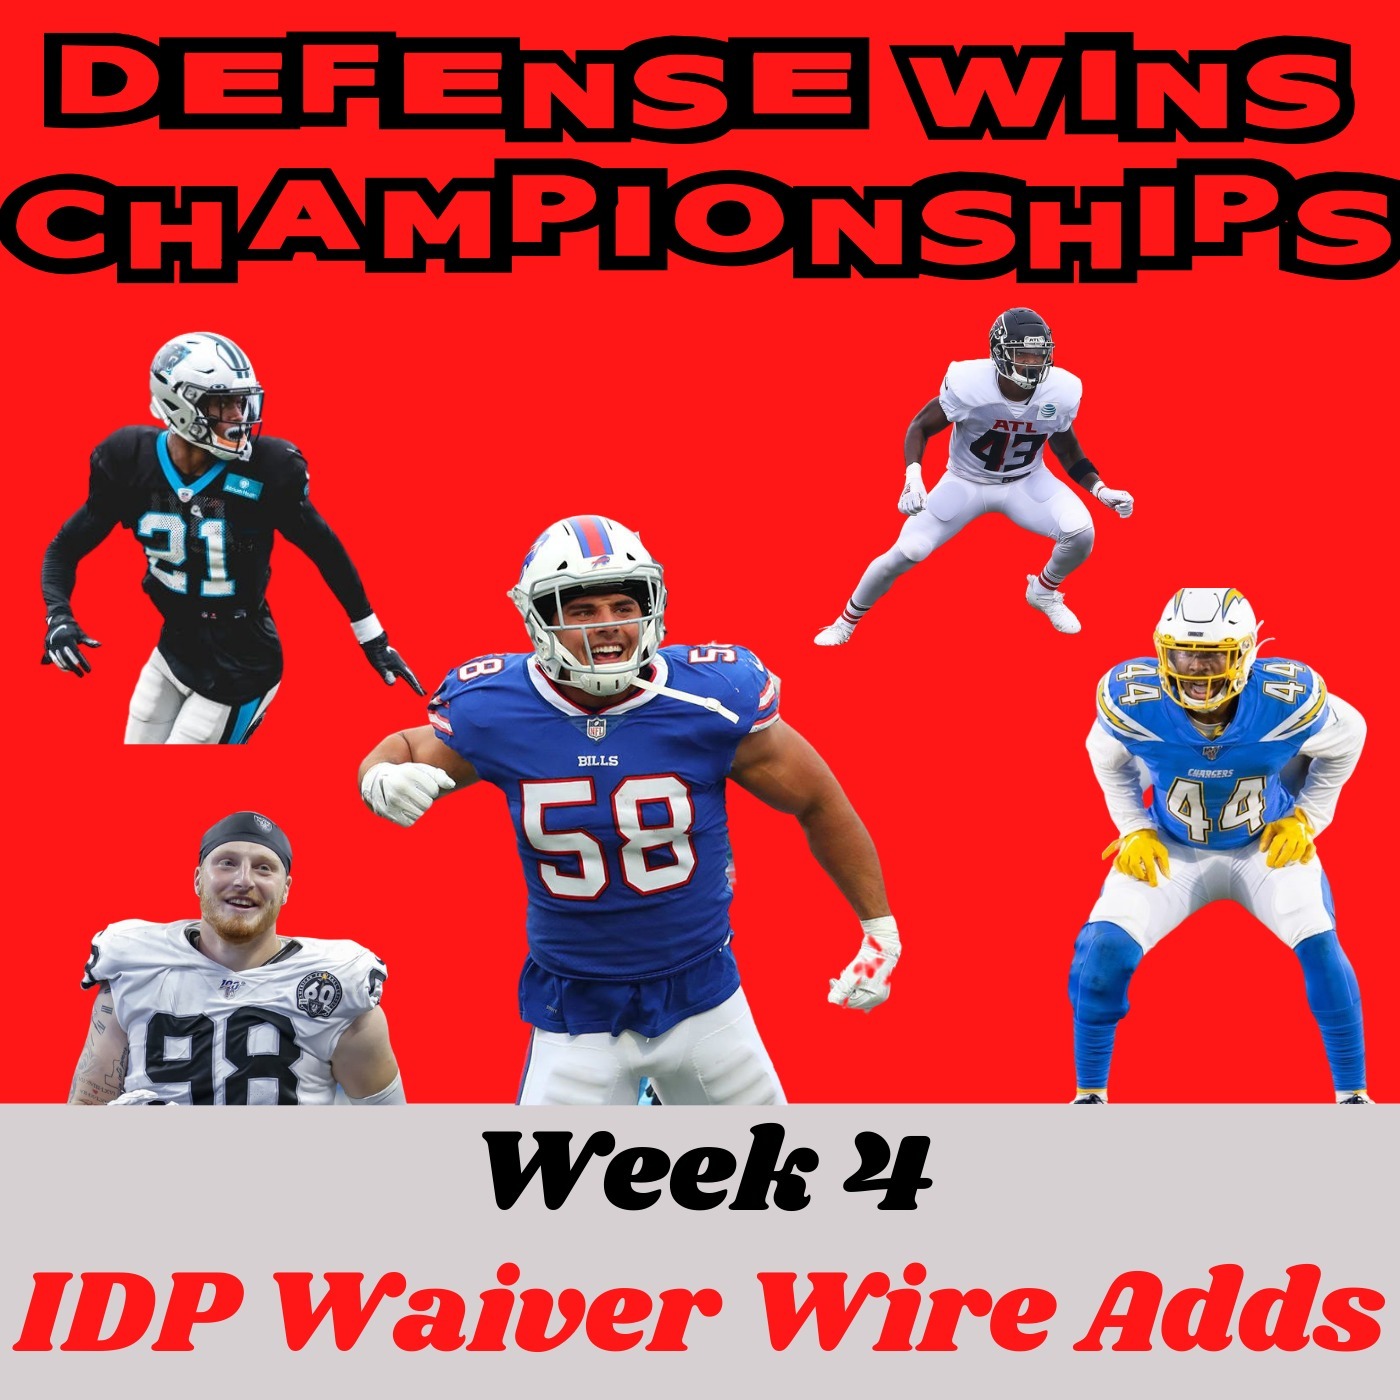 Week 4 IDP Waiver Wire Adds | Defense Wins Championships